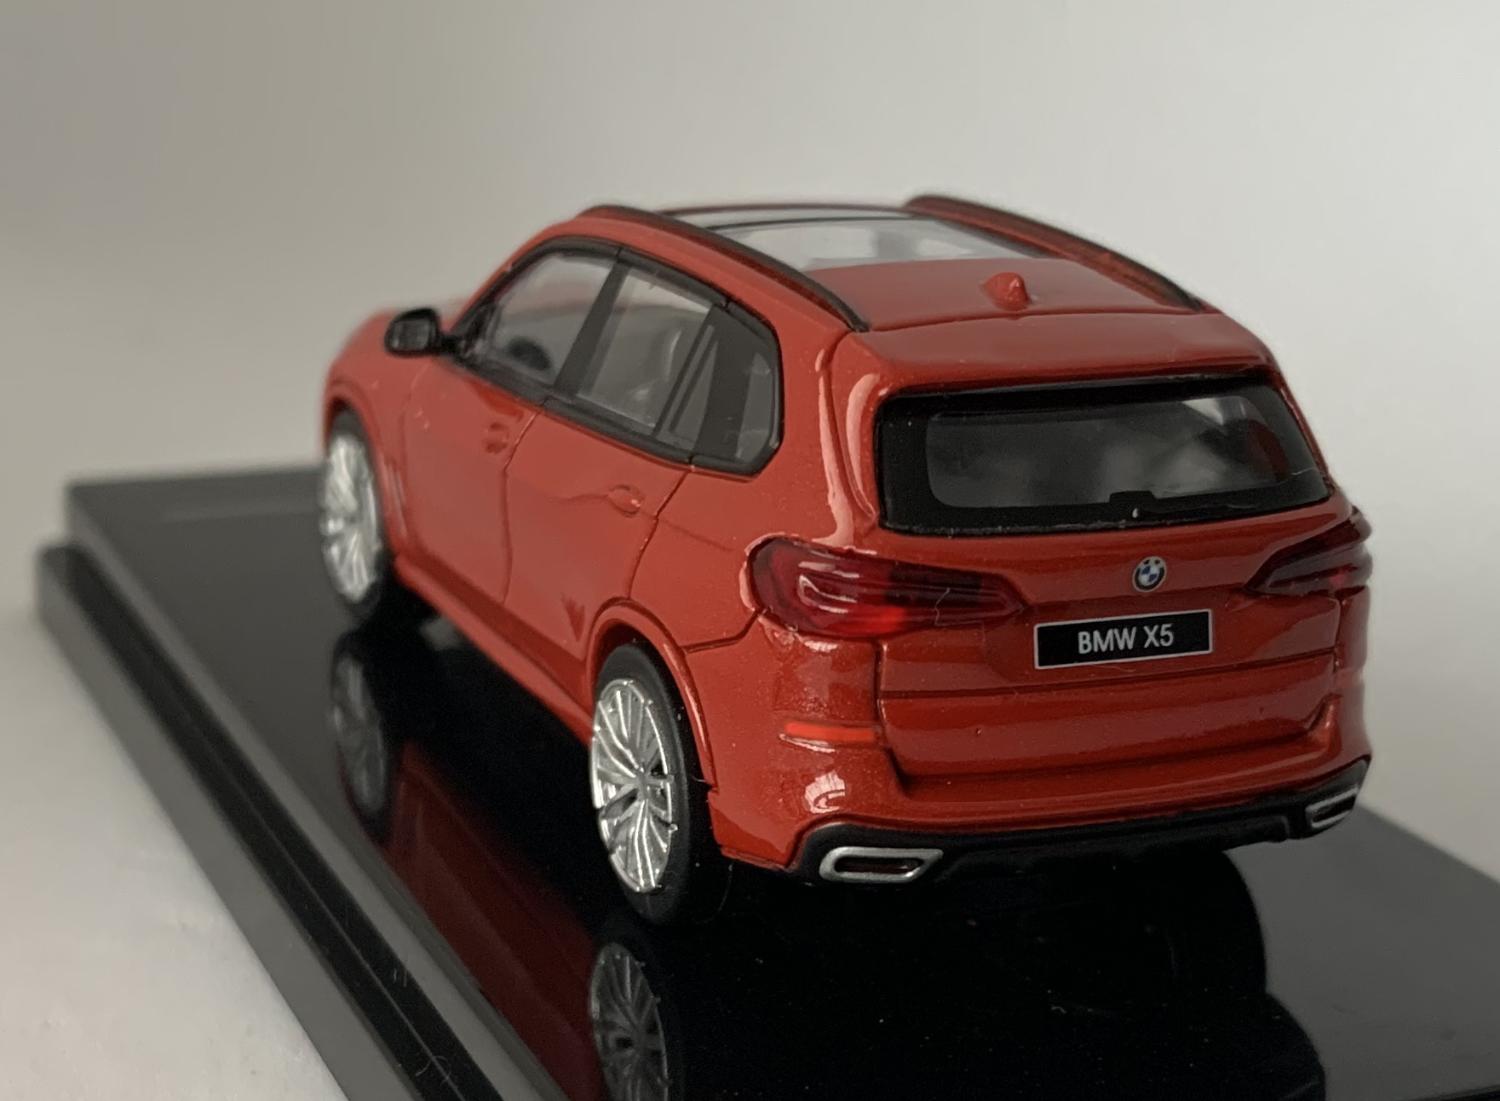 An excellent scale model of a BMW X5 decorated in Toronto red with panoramic roof, roof rails